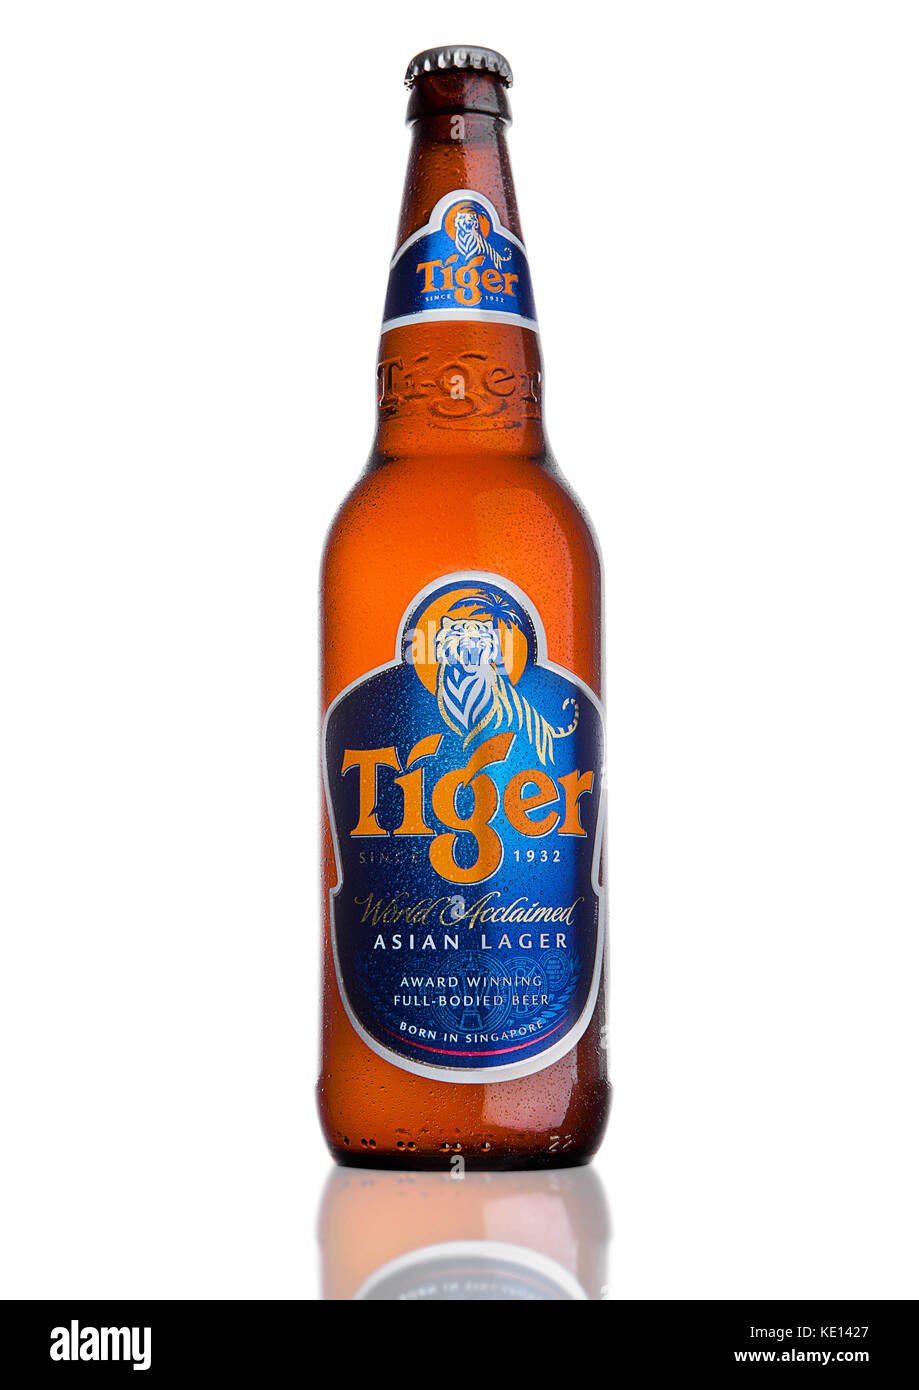 LONDON, UK, DECEMBER 15, 2016: Bottle of Tiger Beer on white background, First launched in 1932 is Singapore's first brewed beer. Stock Photo